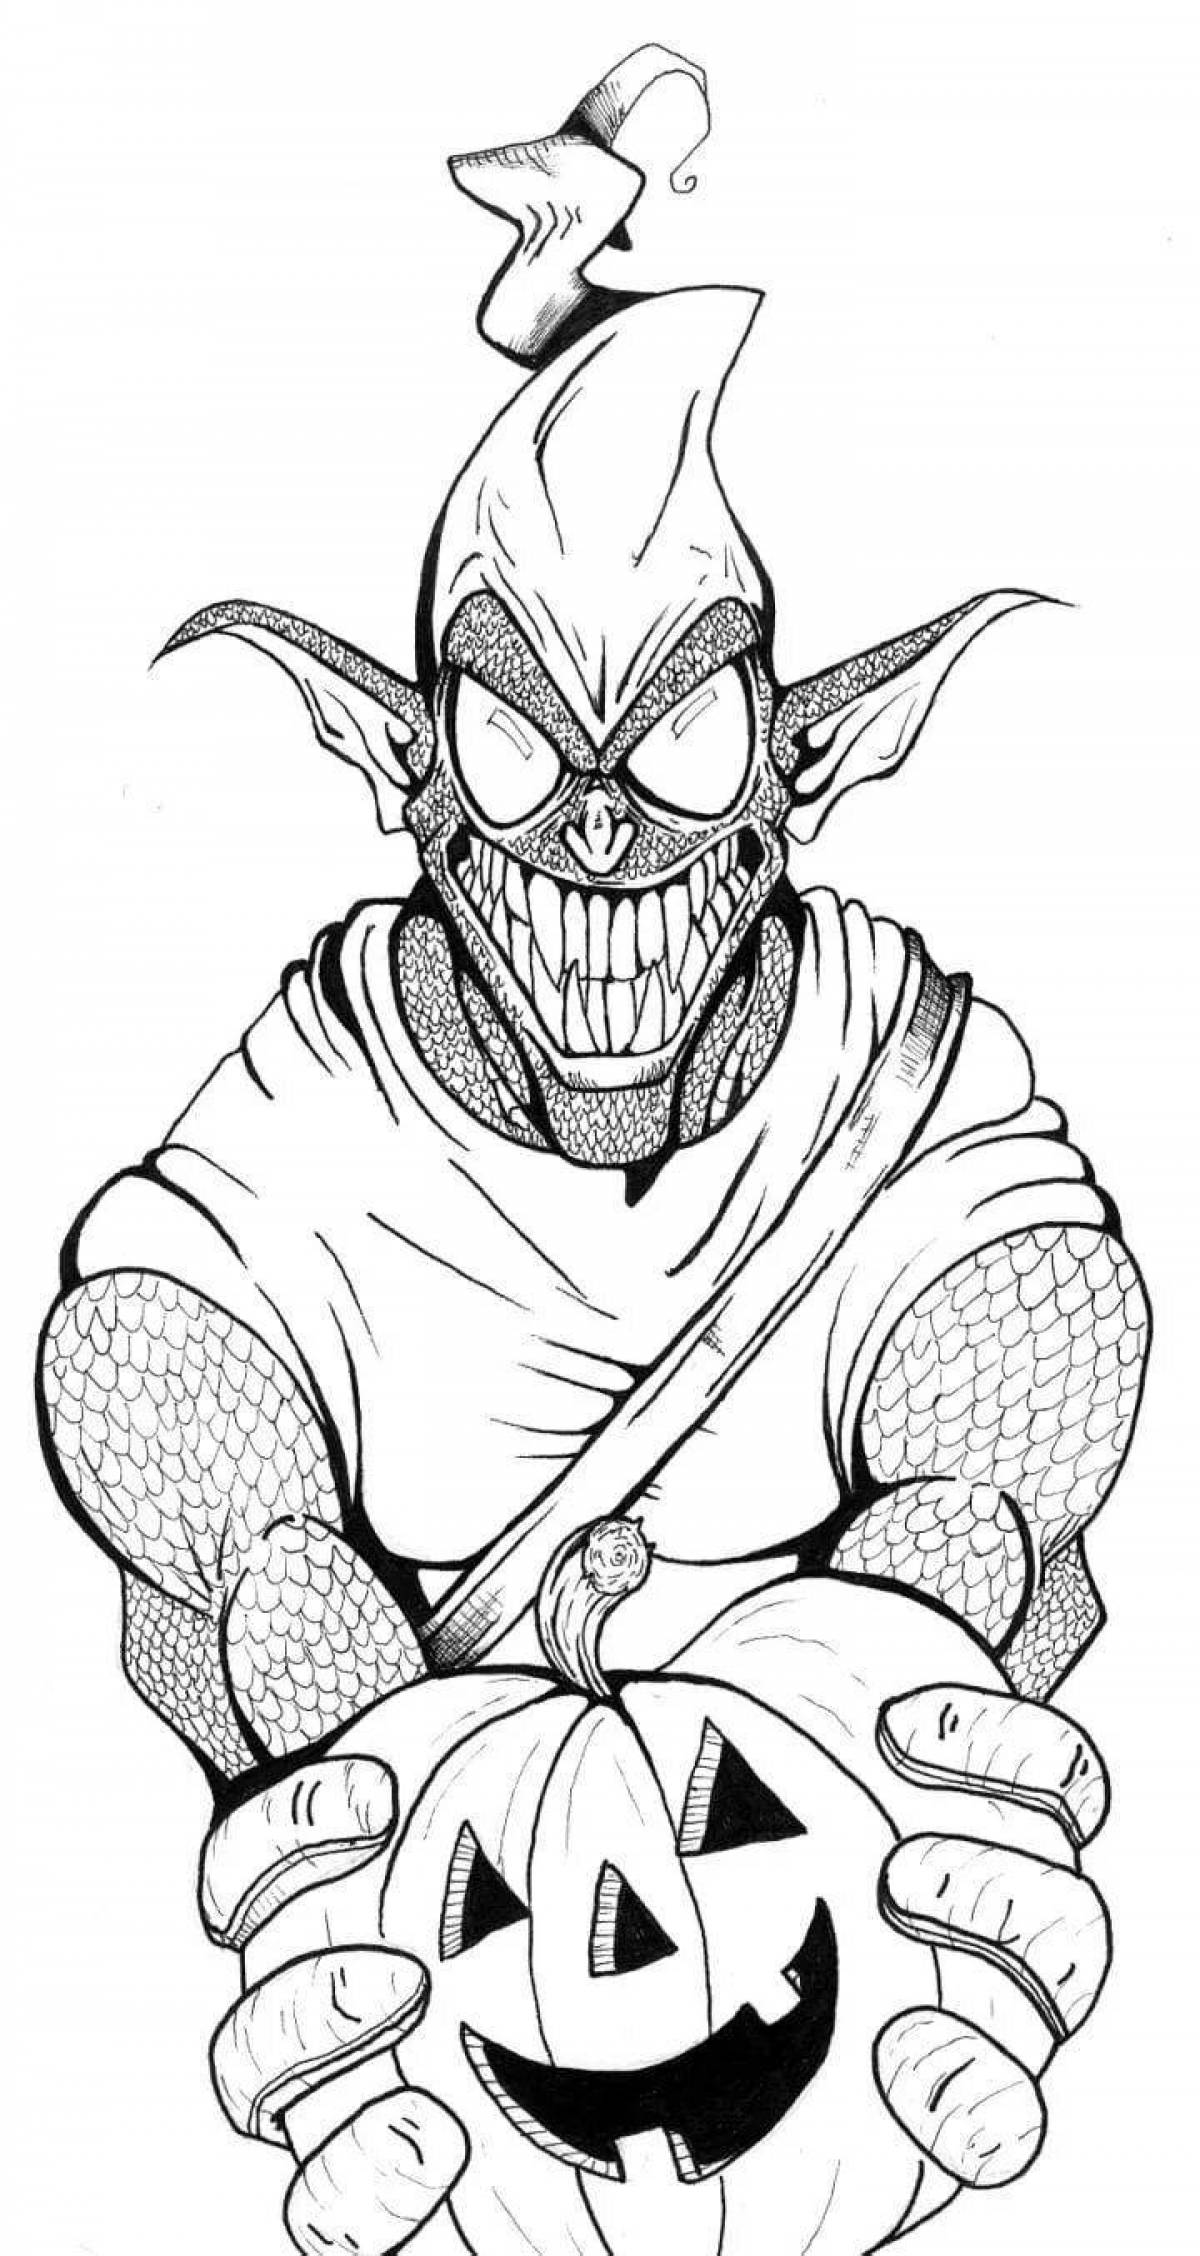 Great supervillain coloring book